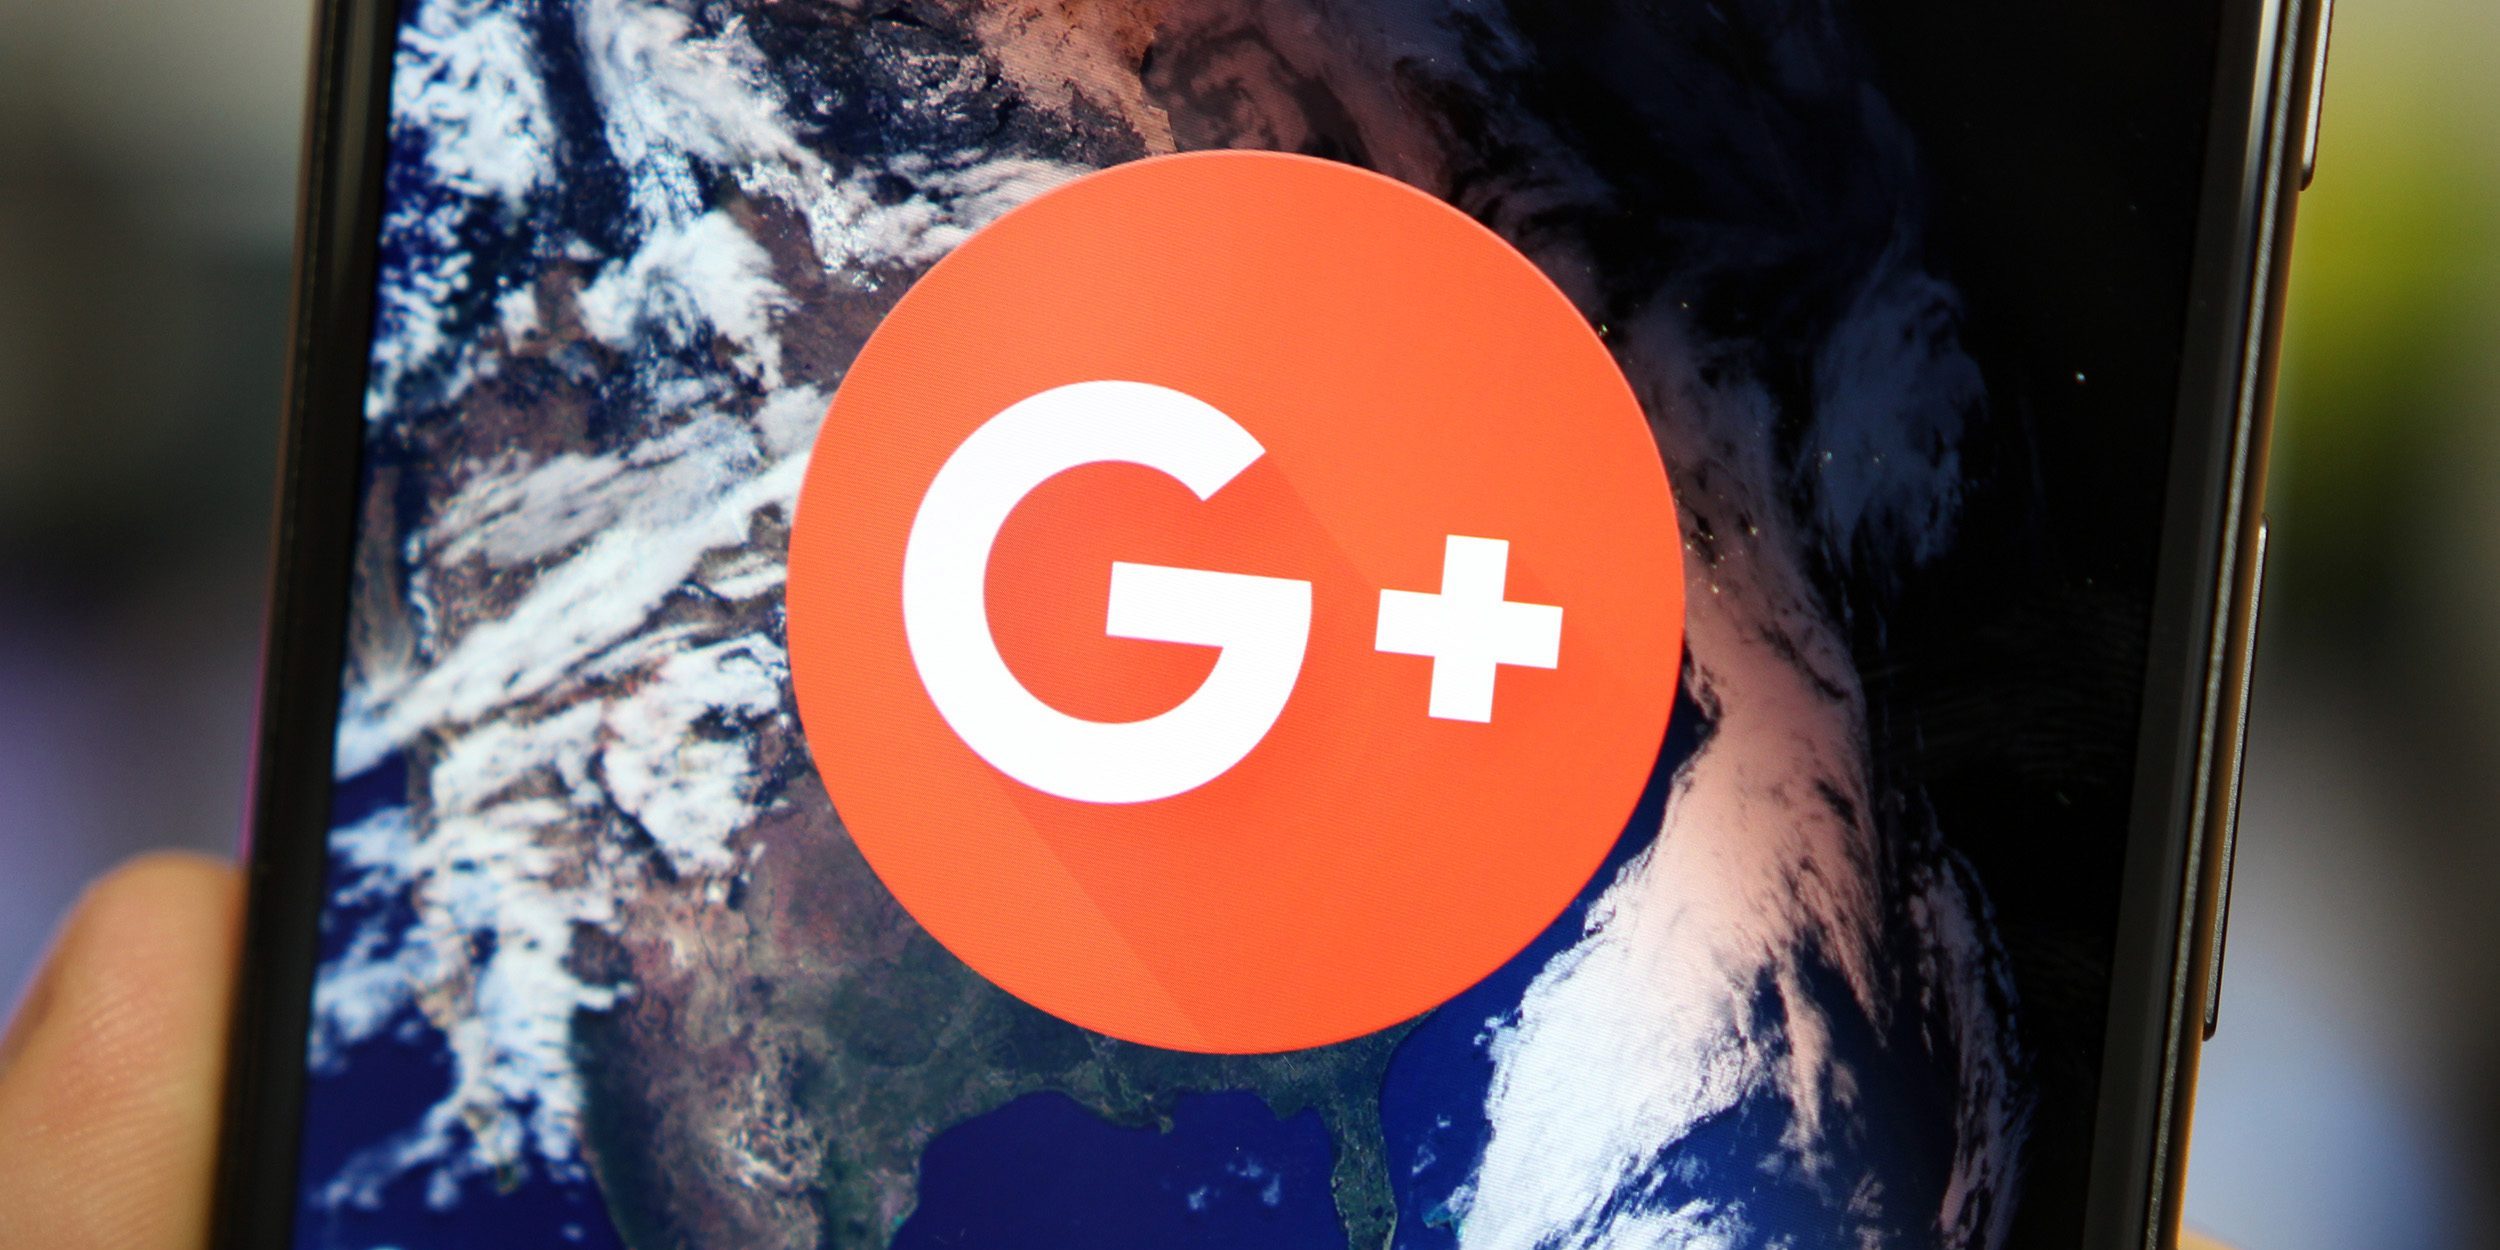 Google+ for Android adopts a brighter design, white bottom bar